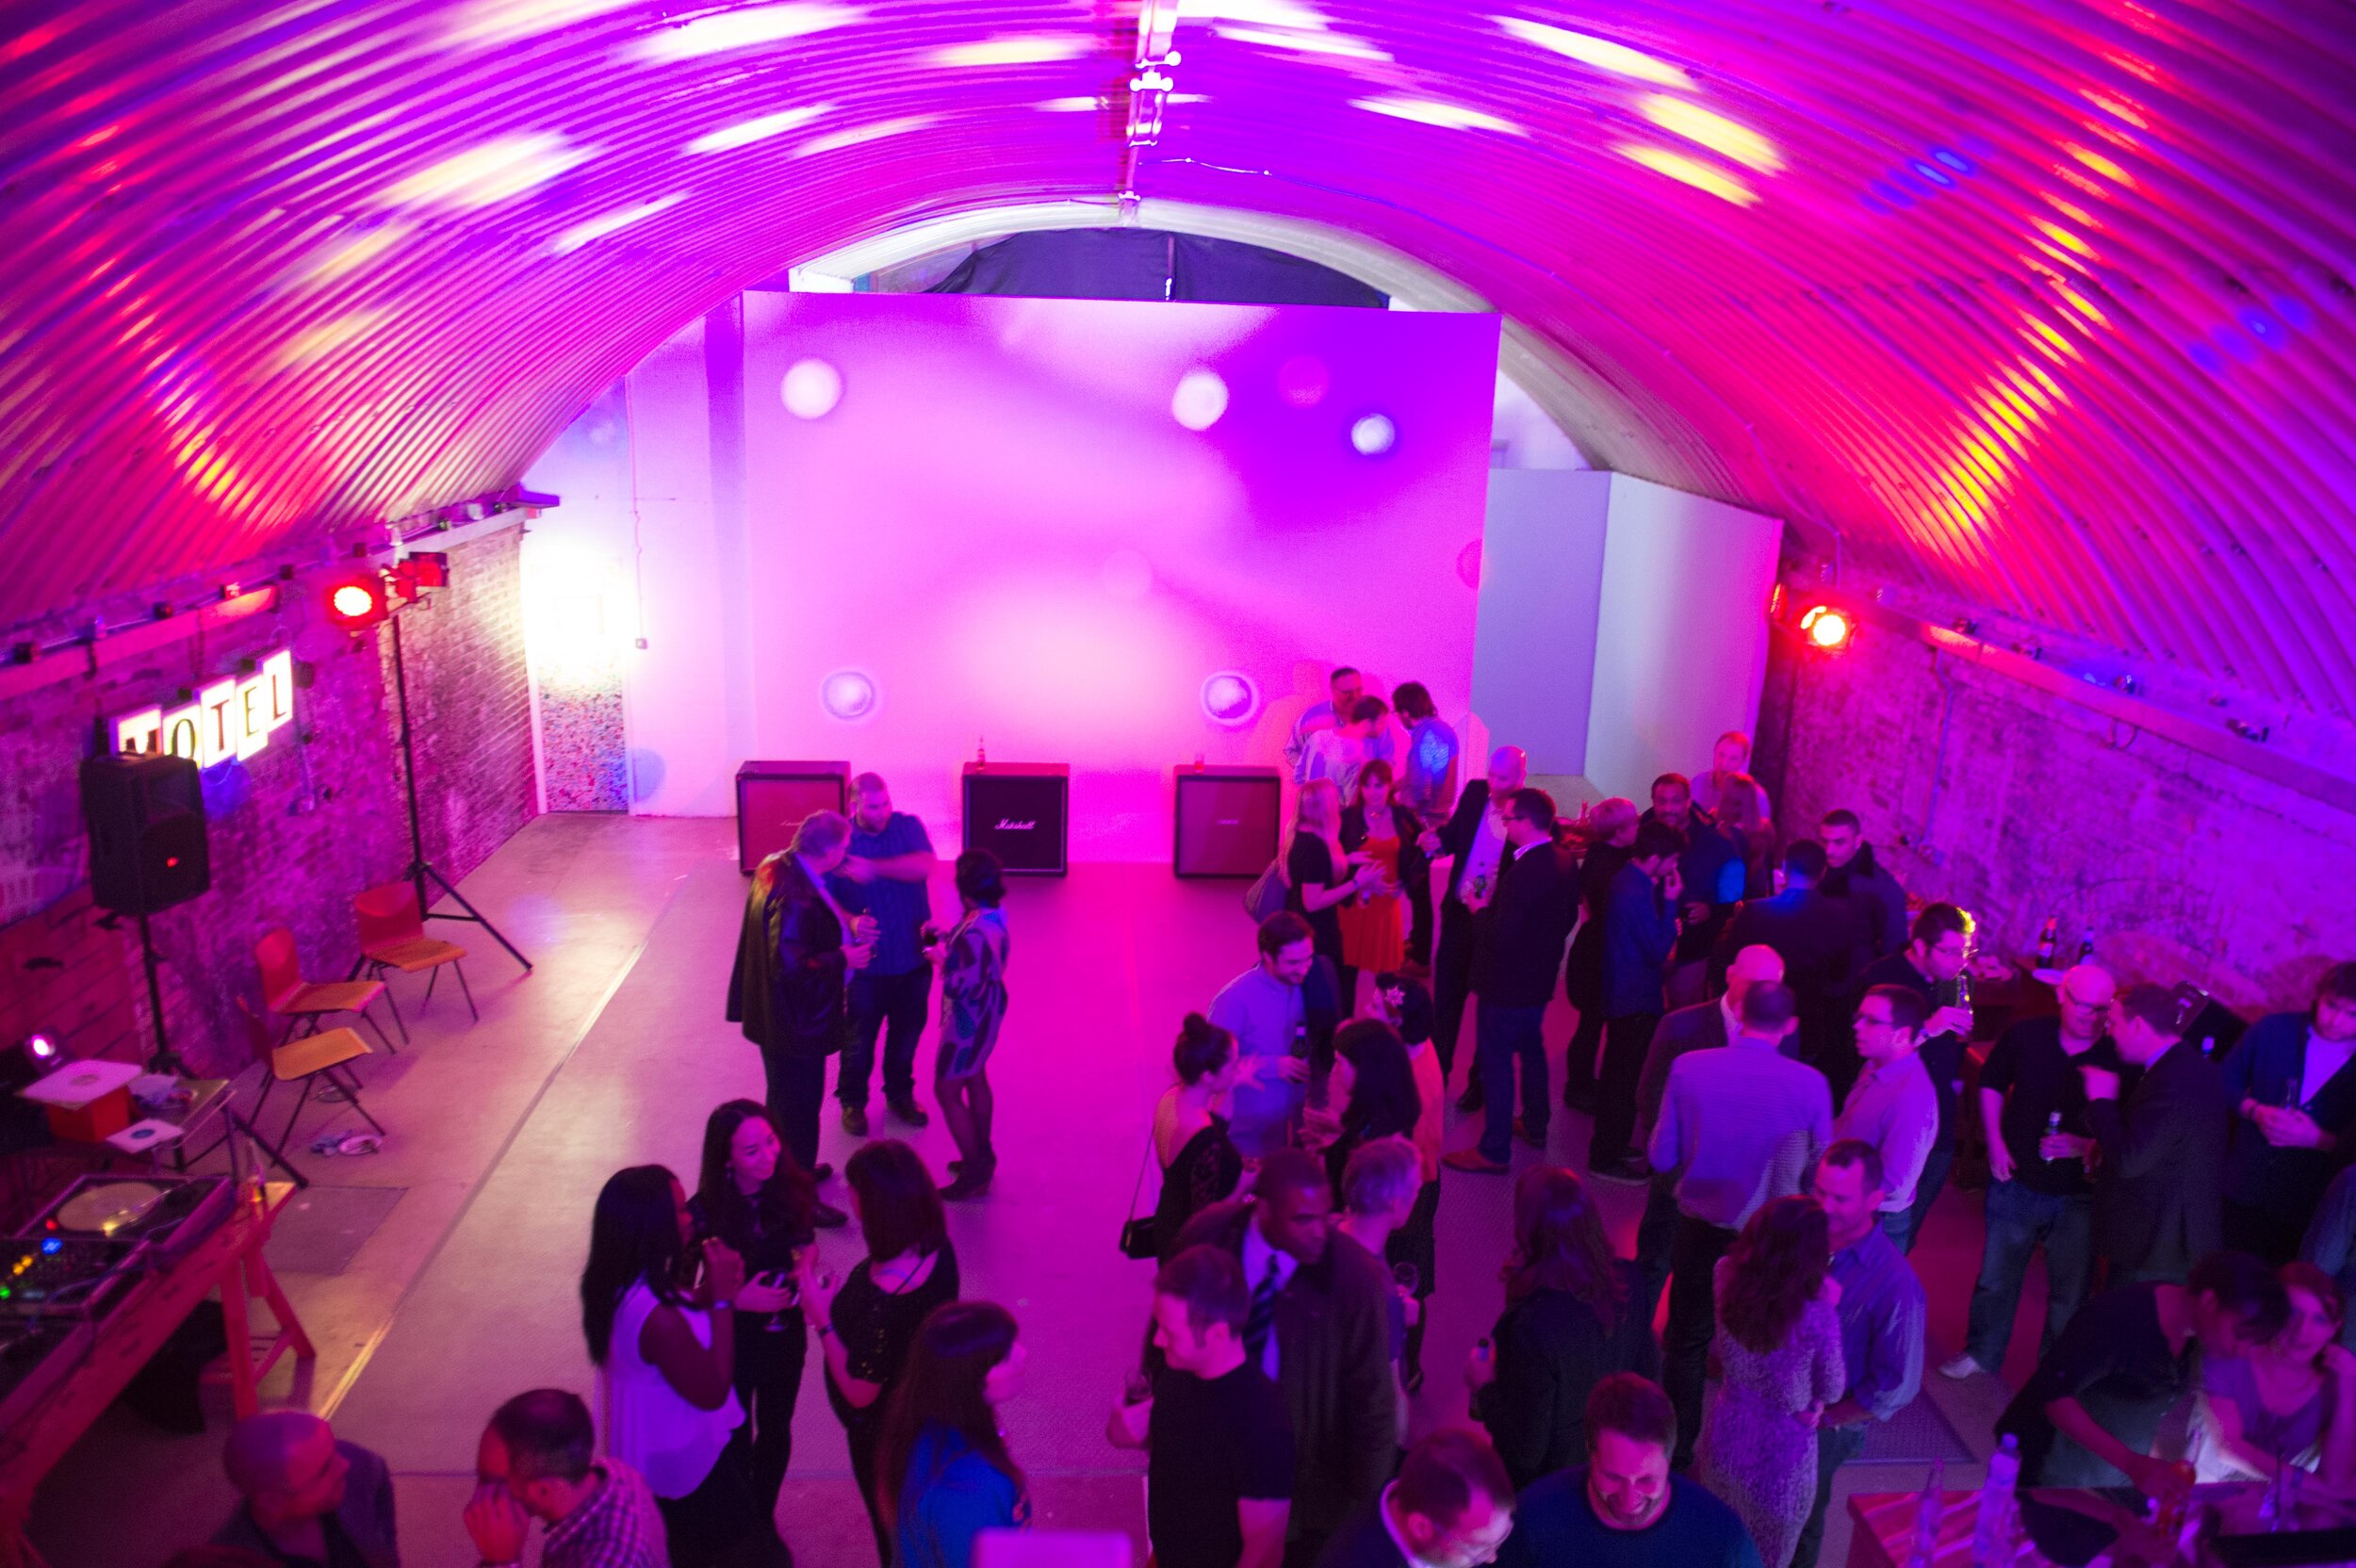 Corporate Event Venue Hire in Shoreditch / Hoxton / East London